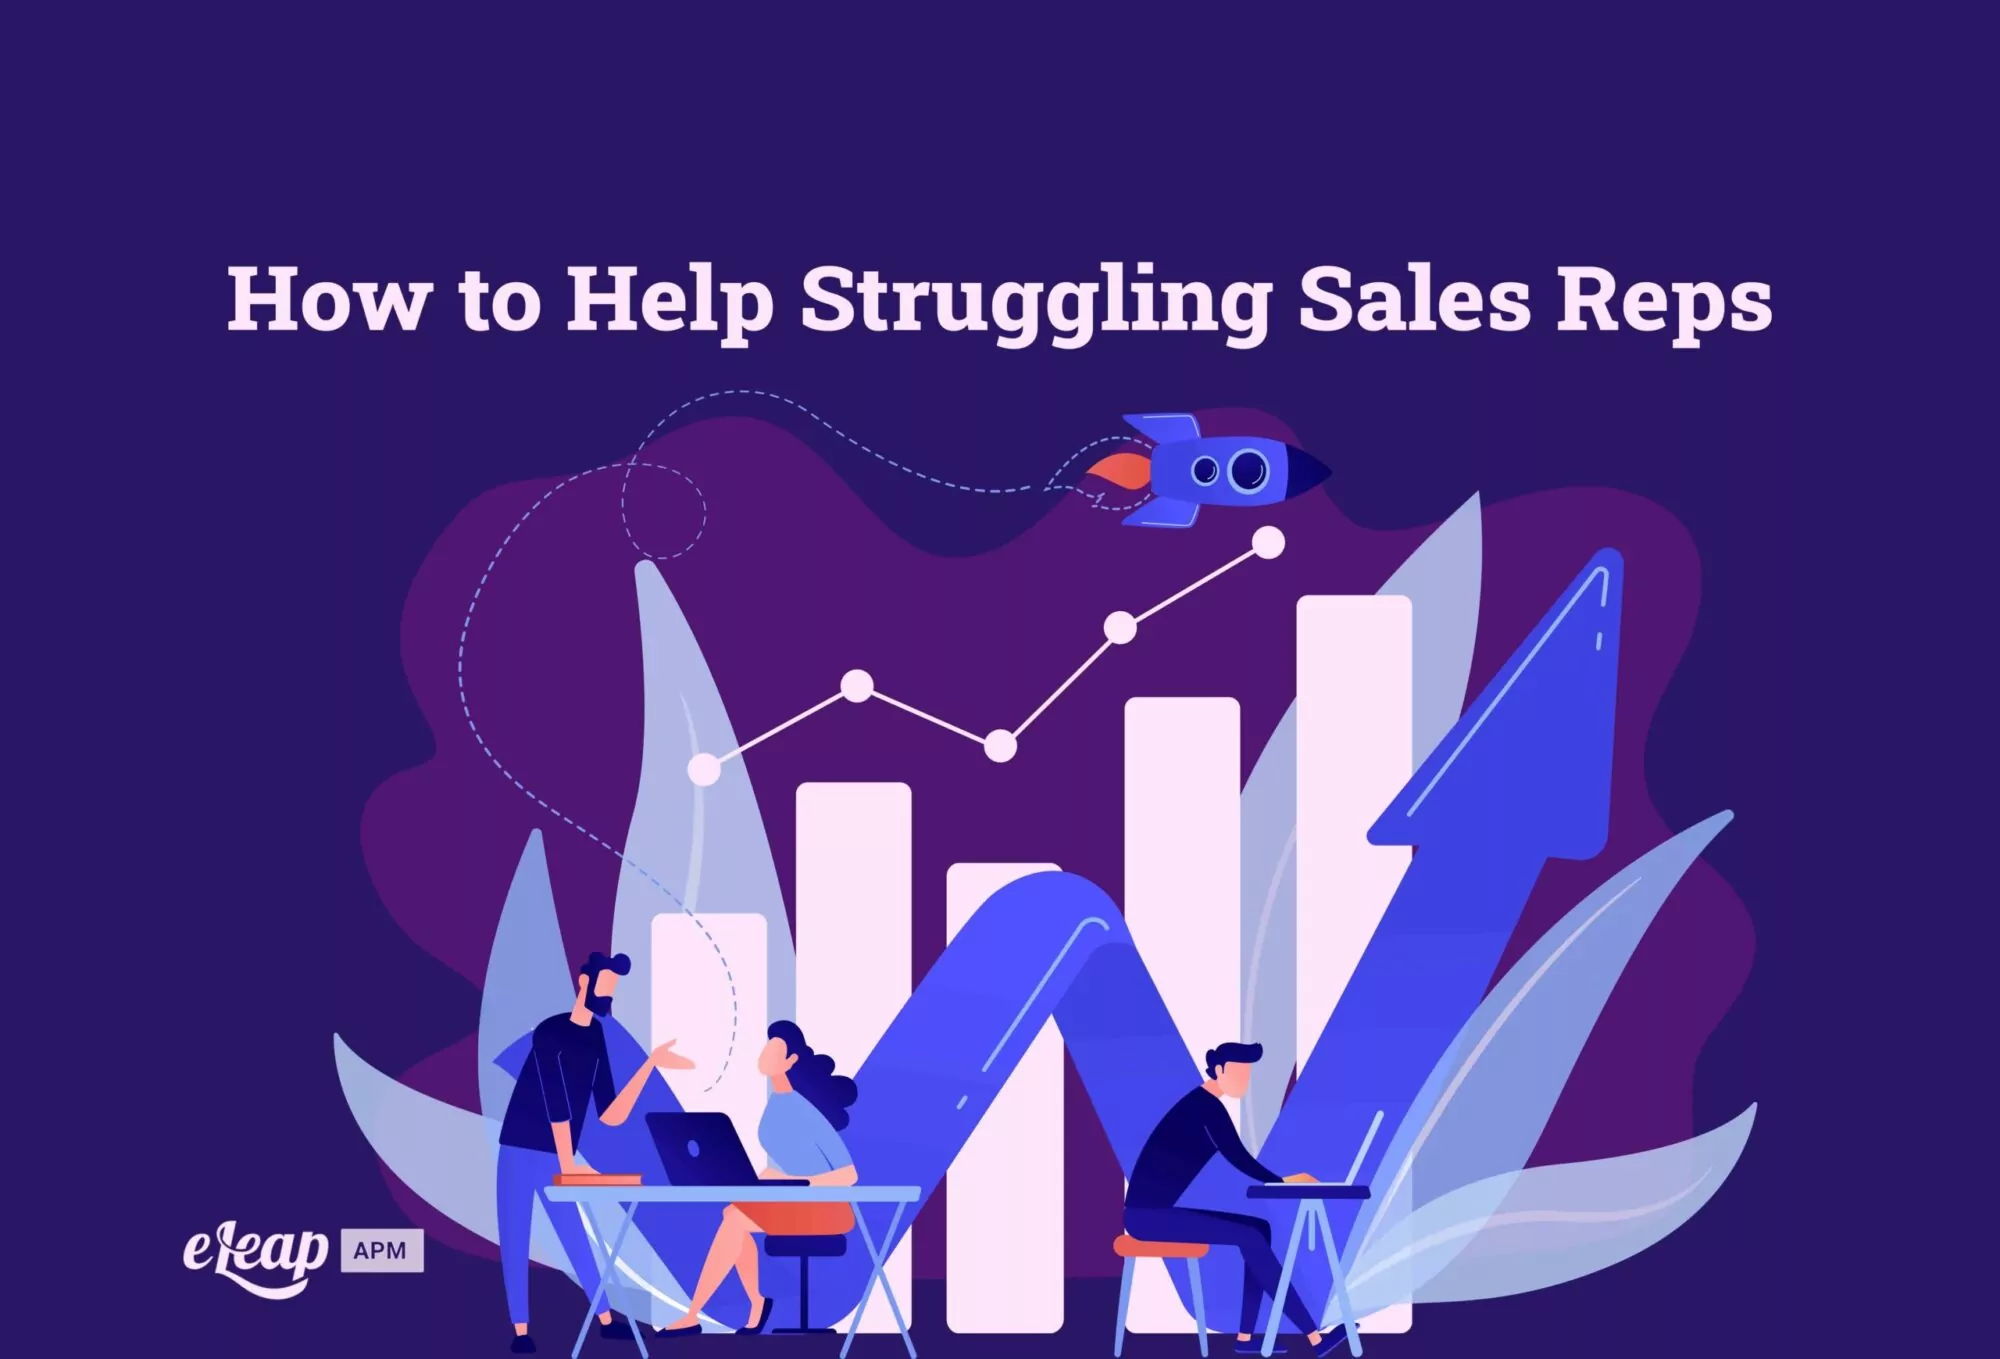 How to Help Struggling Sales Reps